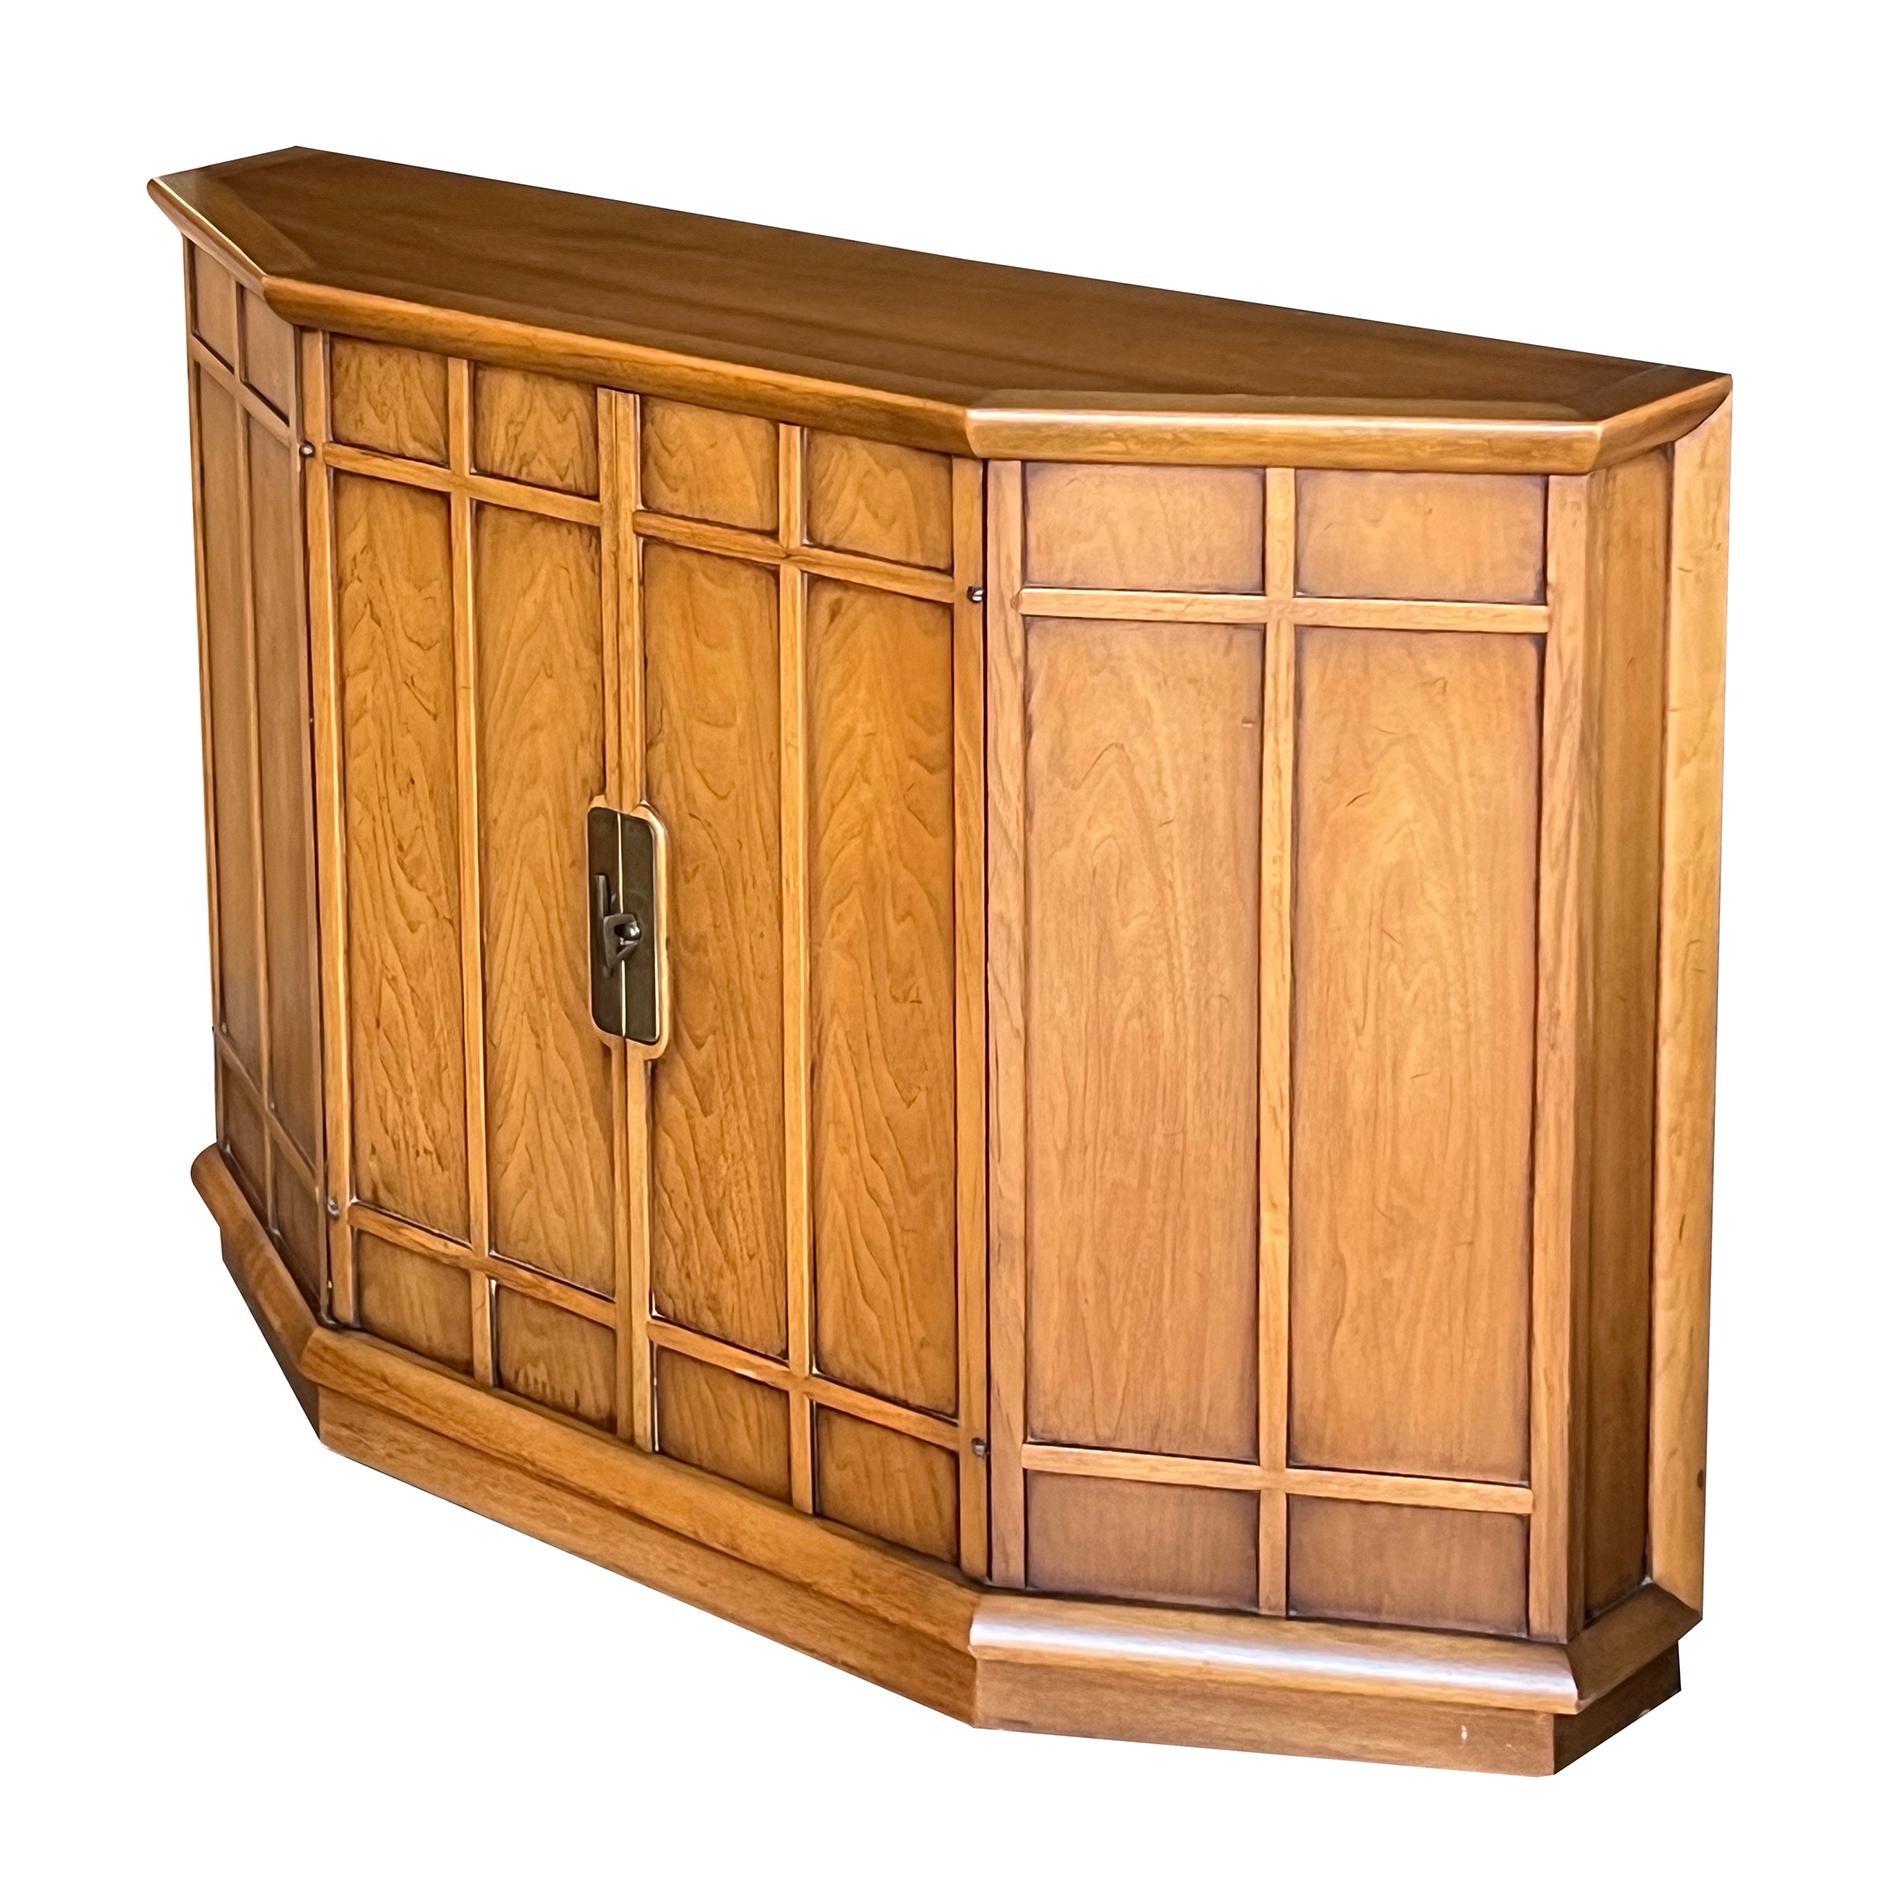 the 3-sided top above a paneled conforming body centering double-doors fitted with a solid brass latch; John Van Koert was a prominent New York designer who helped promote the fascination with Danish modern furnishings in the 1950's. In 1954, he was